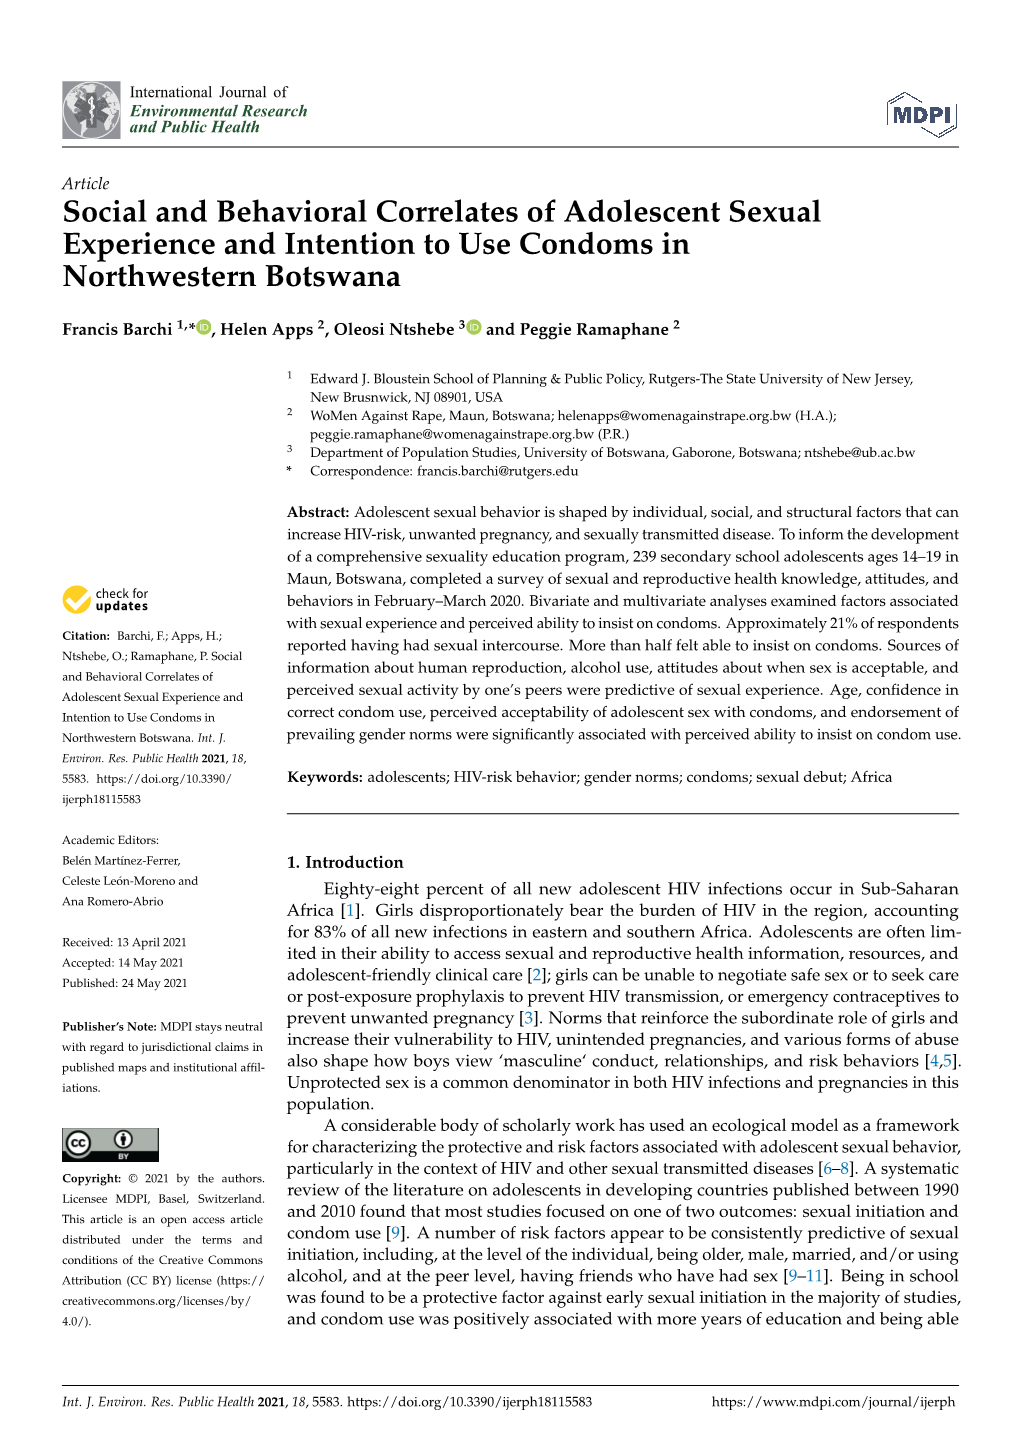 Social and Behavioral Correlates of Adolescent Sexual Experience and Intention to Use Condoms in Northwestern Botswana